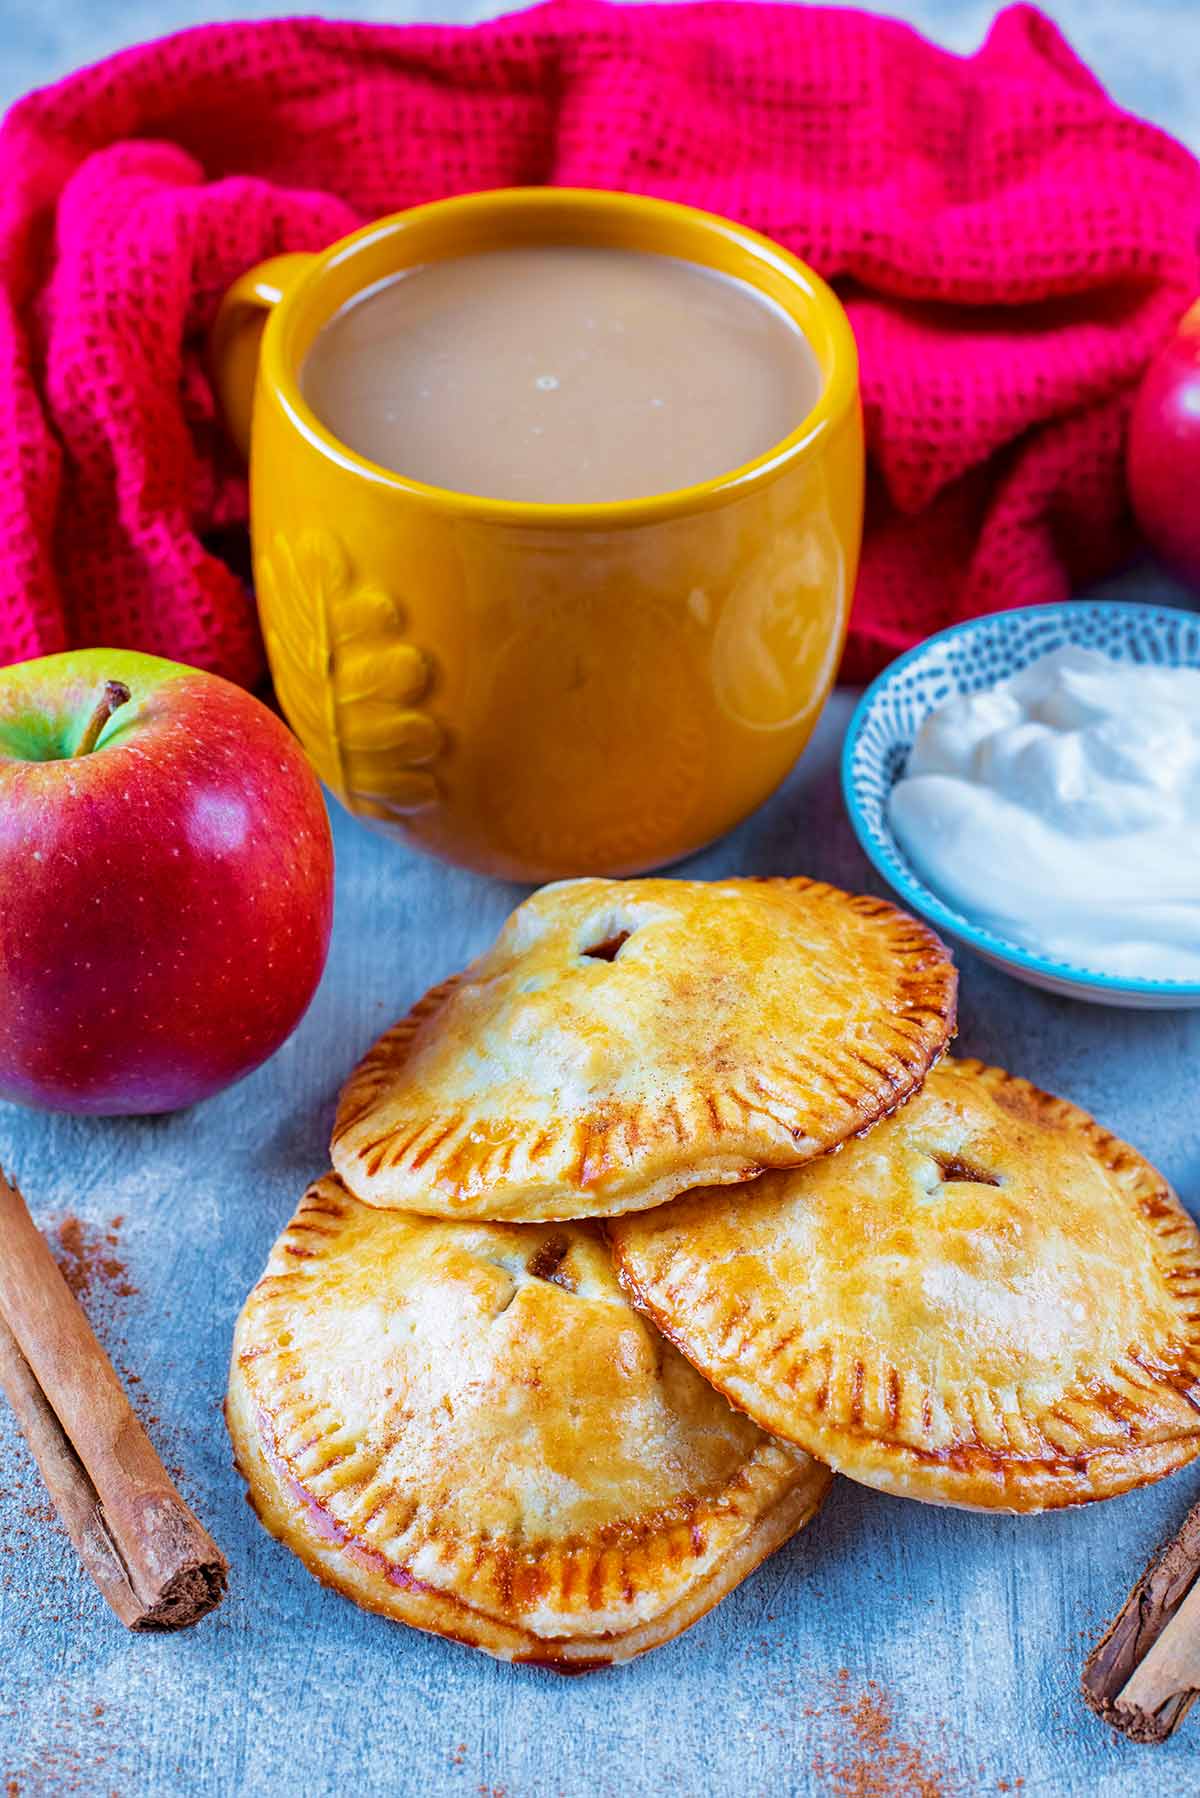 Apple Hand Pies next to a cup of coffee and an apple.